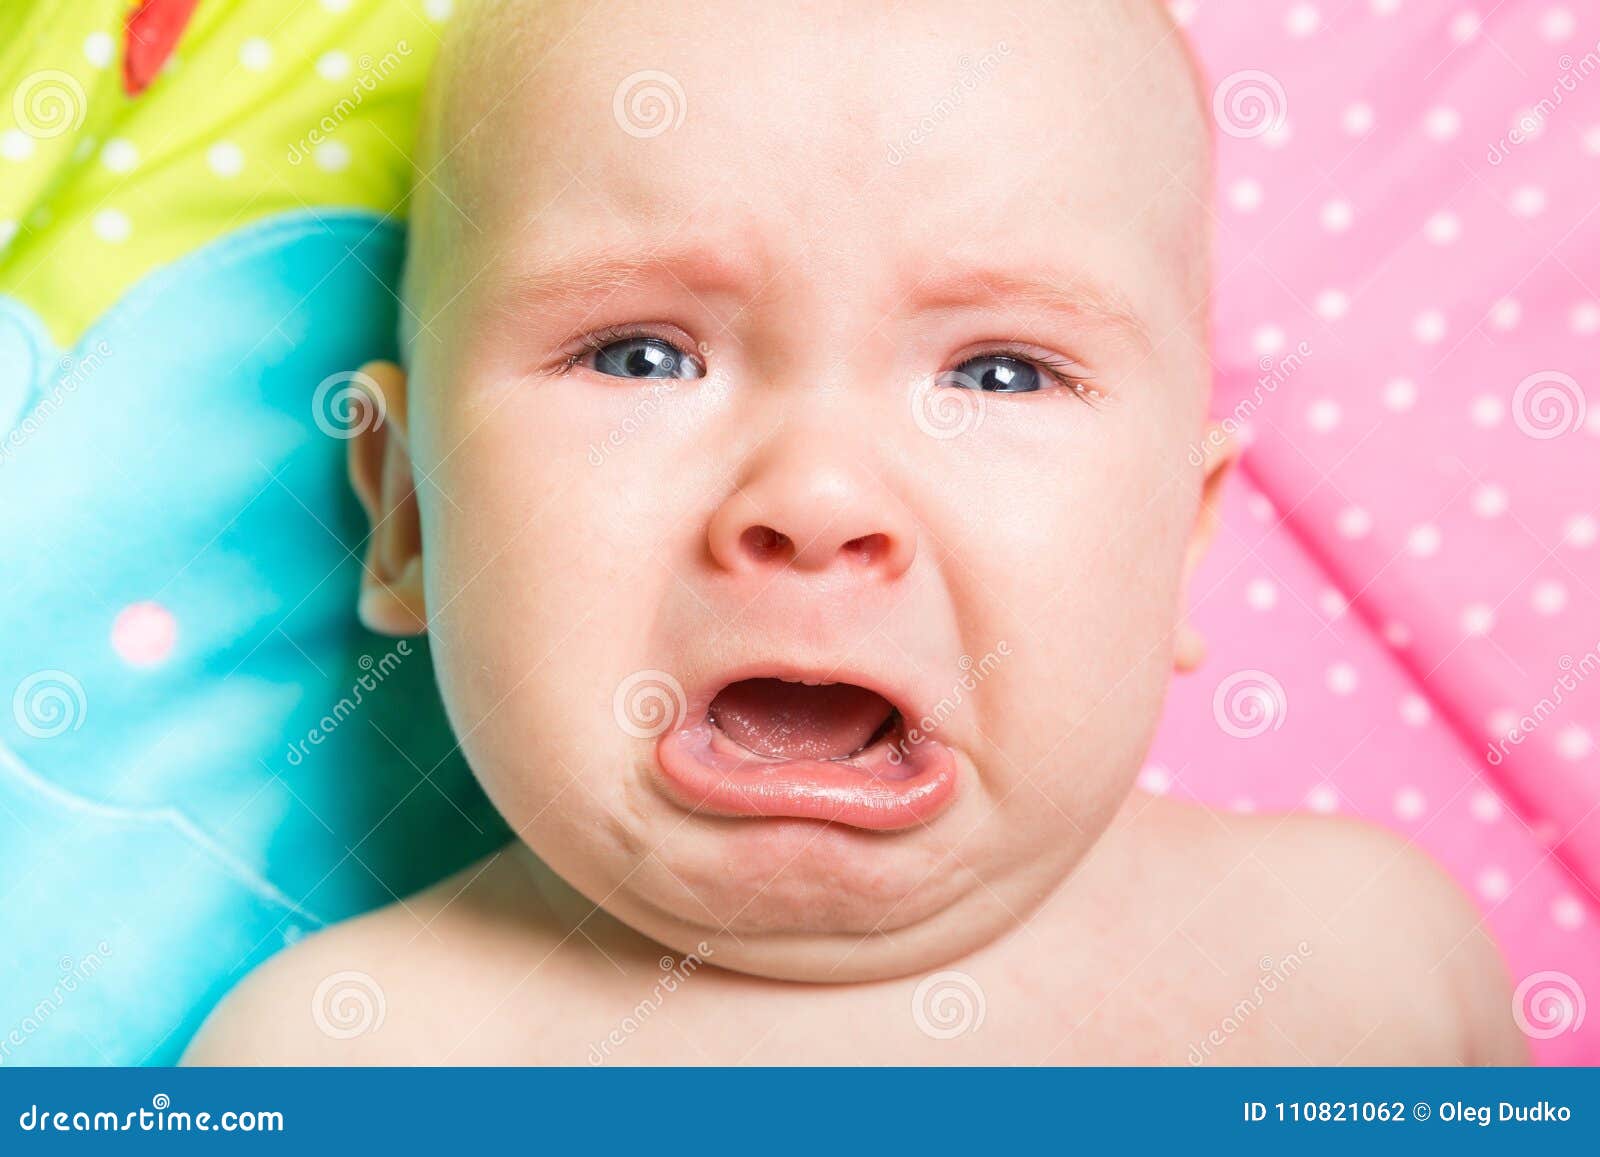 cute crying baby pictures